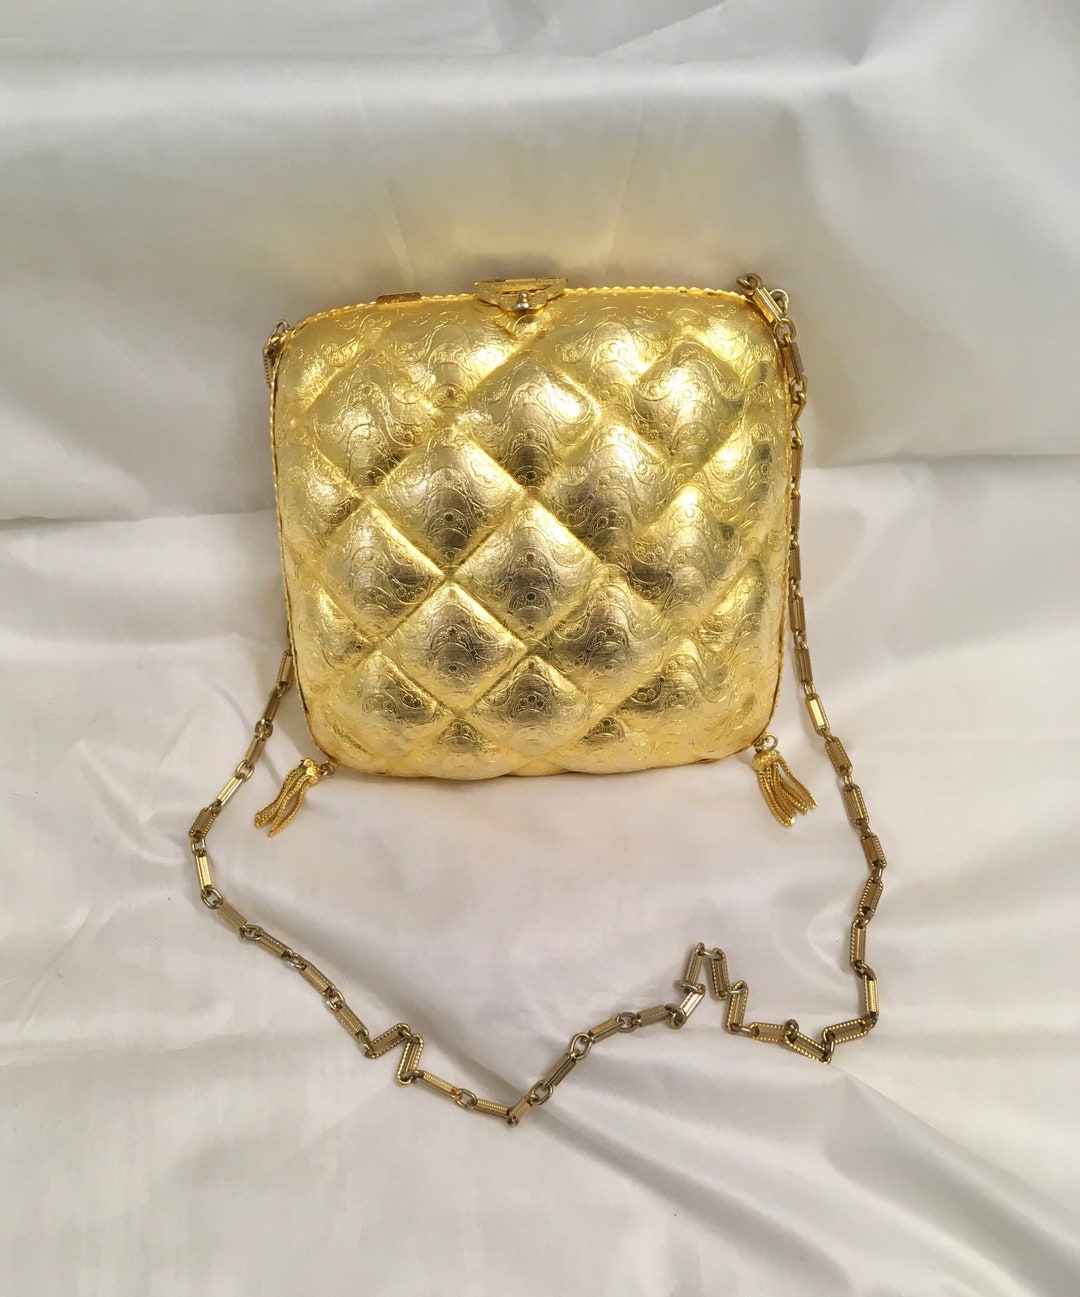 Rosenfeld Gold Metal Purse Vintage 1960s Made in Italy - Etsy